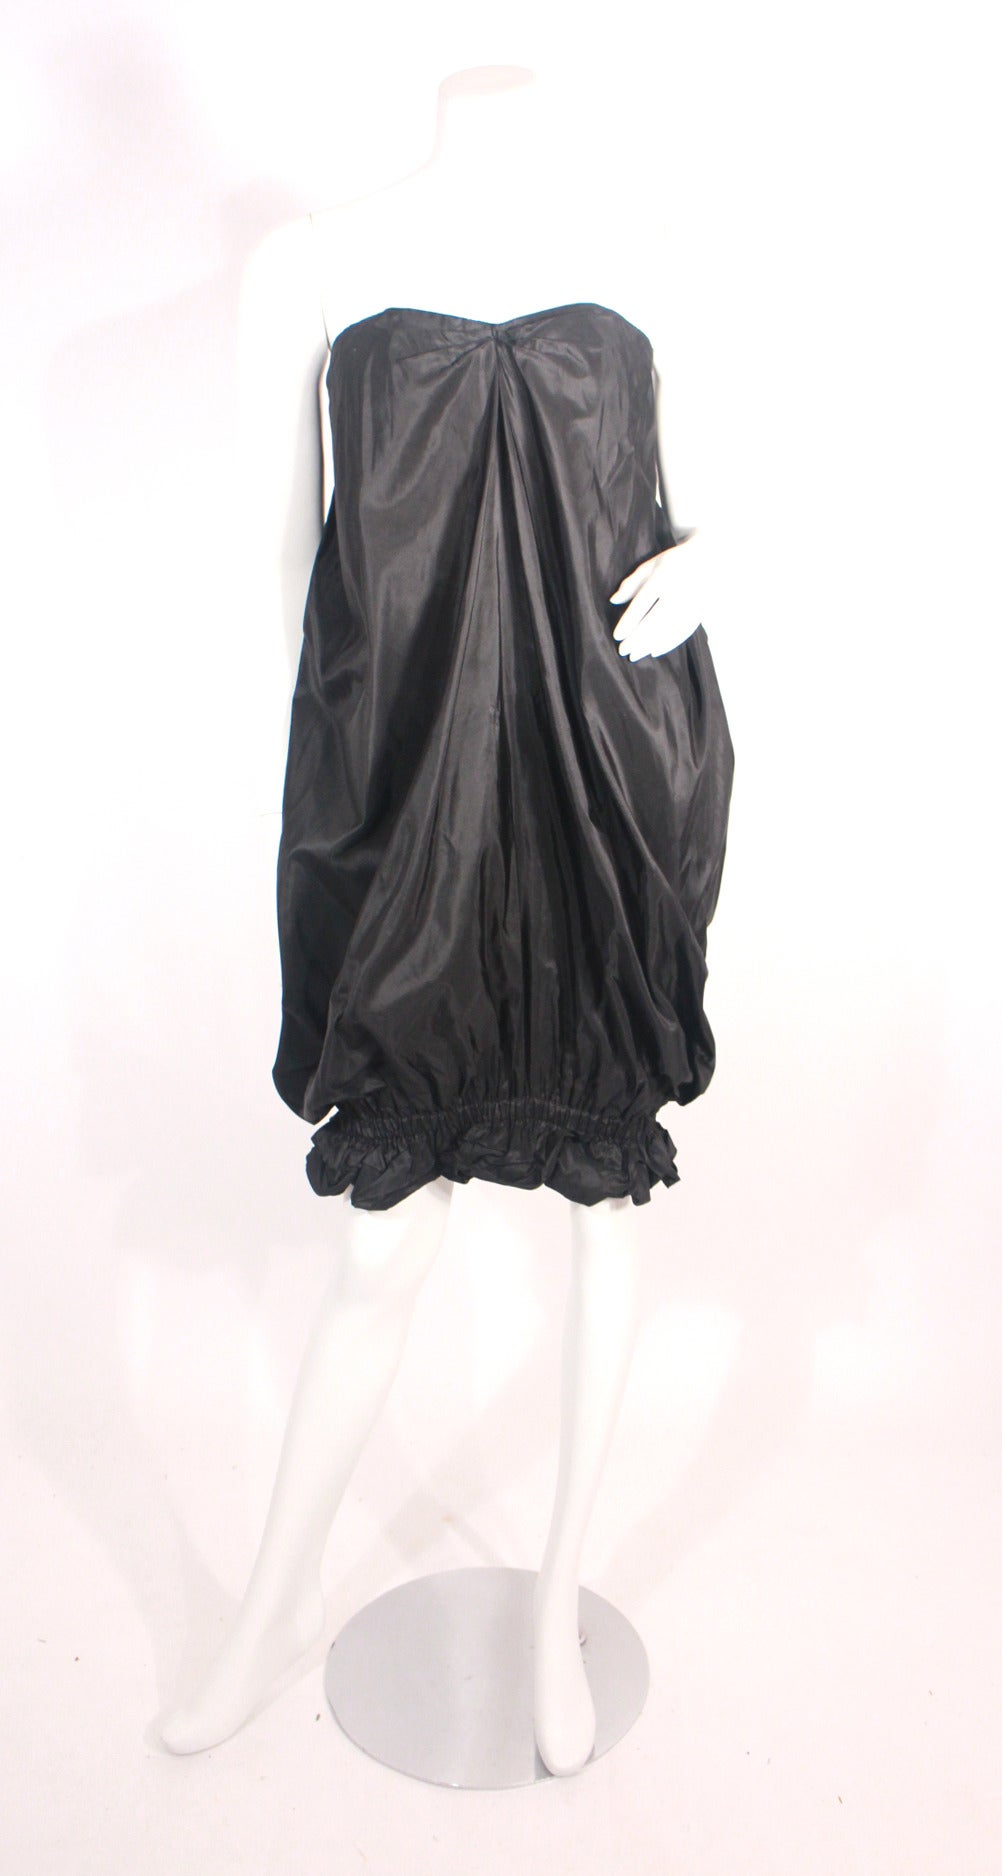 Iconic vintage 1980s Yves Saint Laurent rive gauche runway pouf/ puffer dress. Black iridescent strapless dress featuring an oversized bow on the backside, bubble dress style can be worn short or long. There is a boned bustier first layer. Extremely